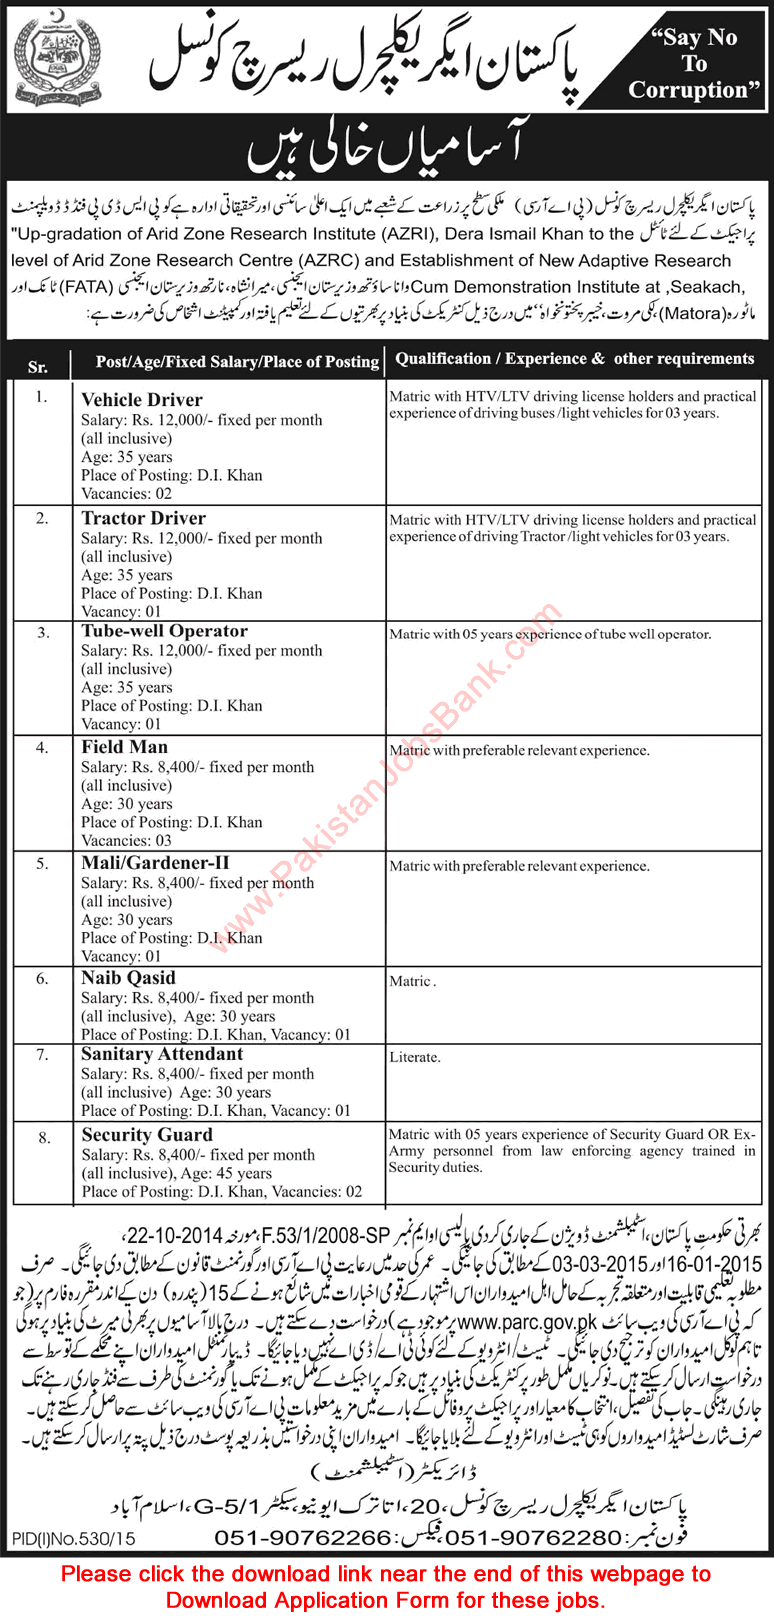 Pakistan Agriculture Research Council Jobs 2015 August PARC Drivers, Field Man, Mali, Naib Qasid & Others